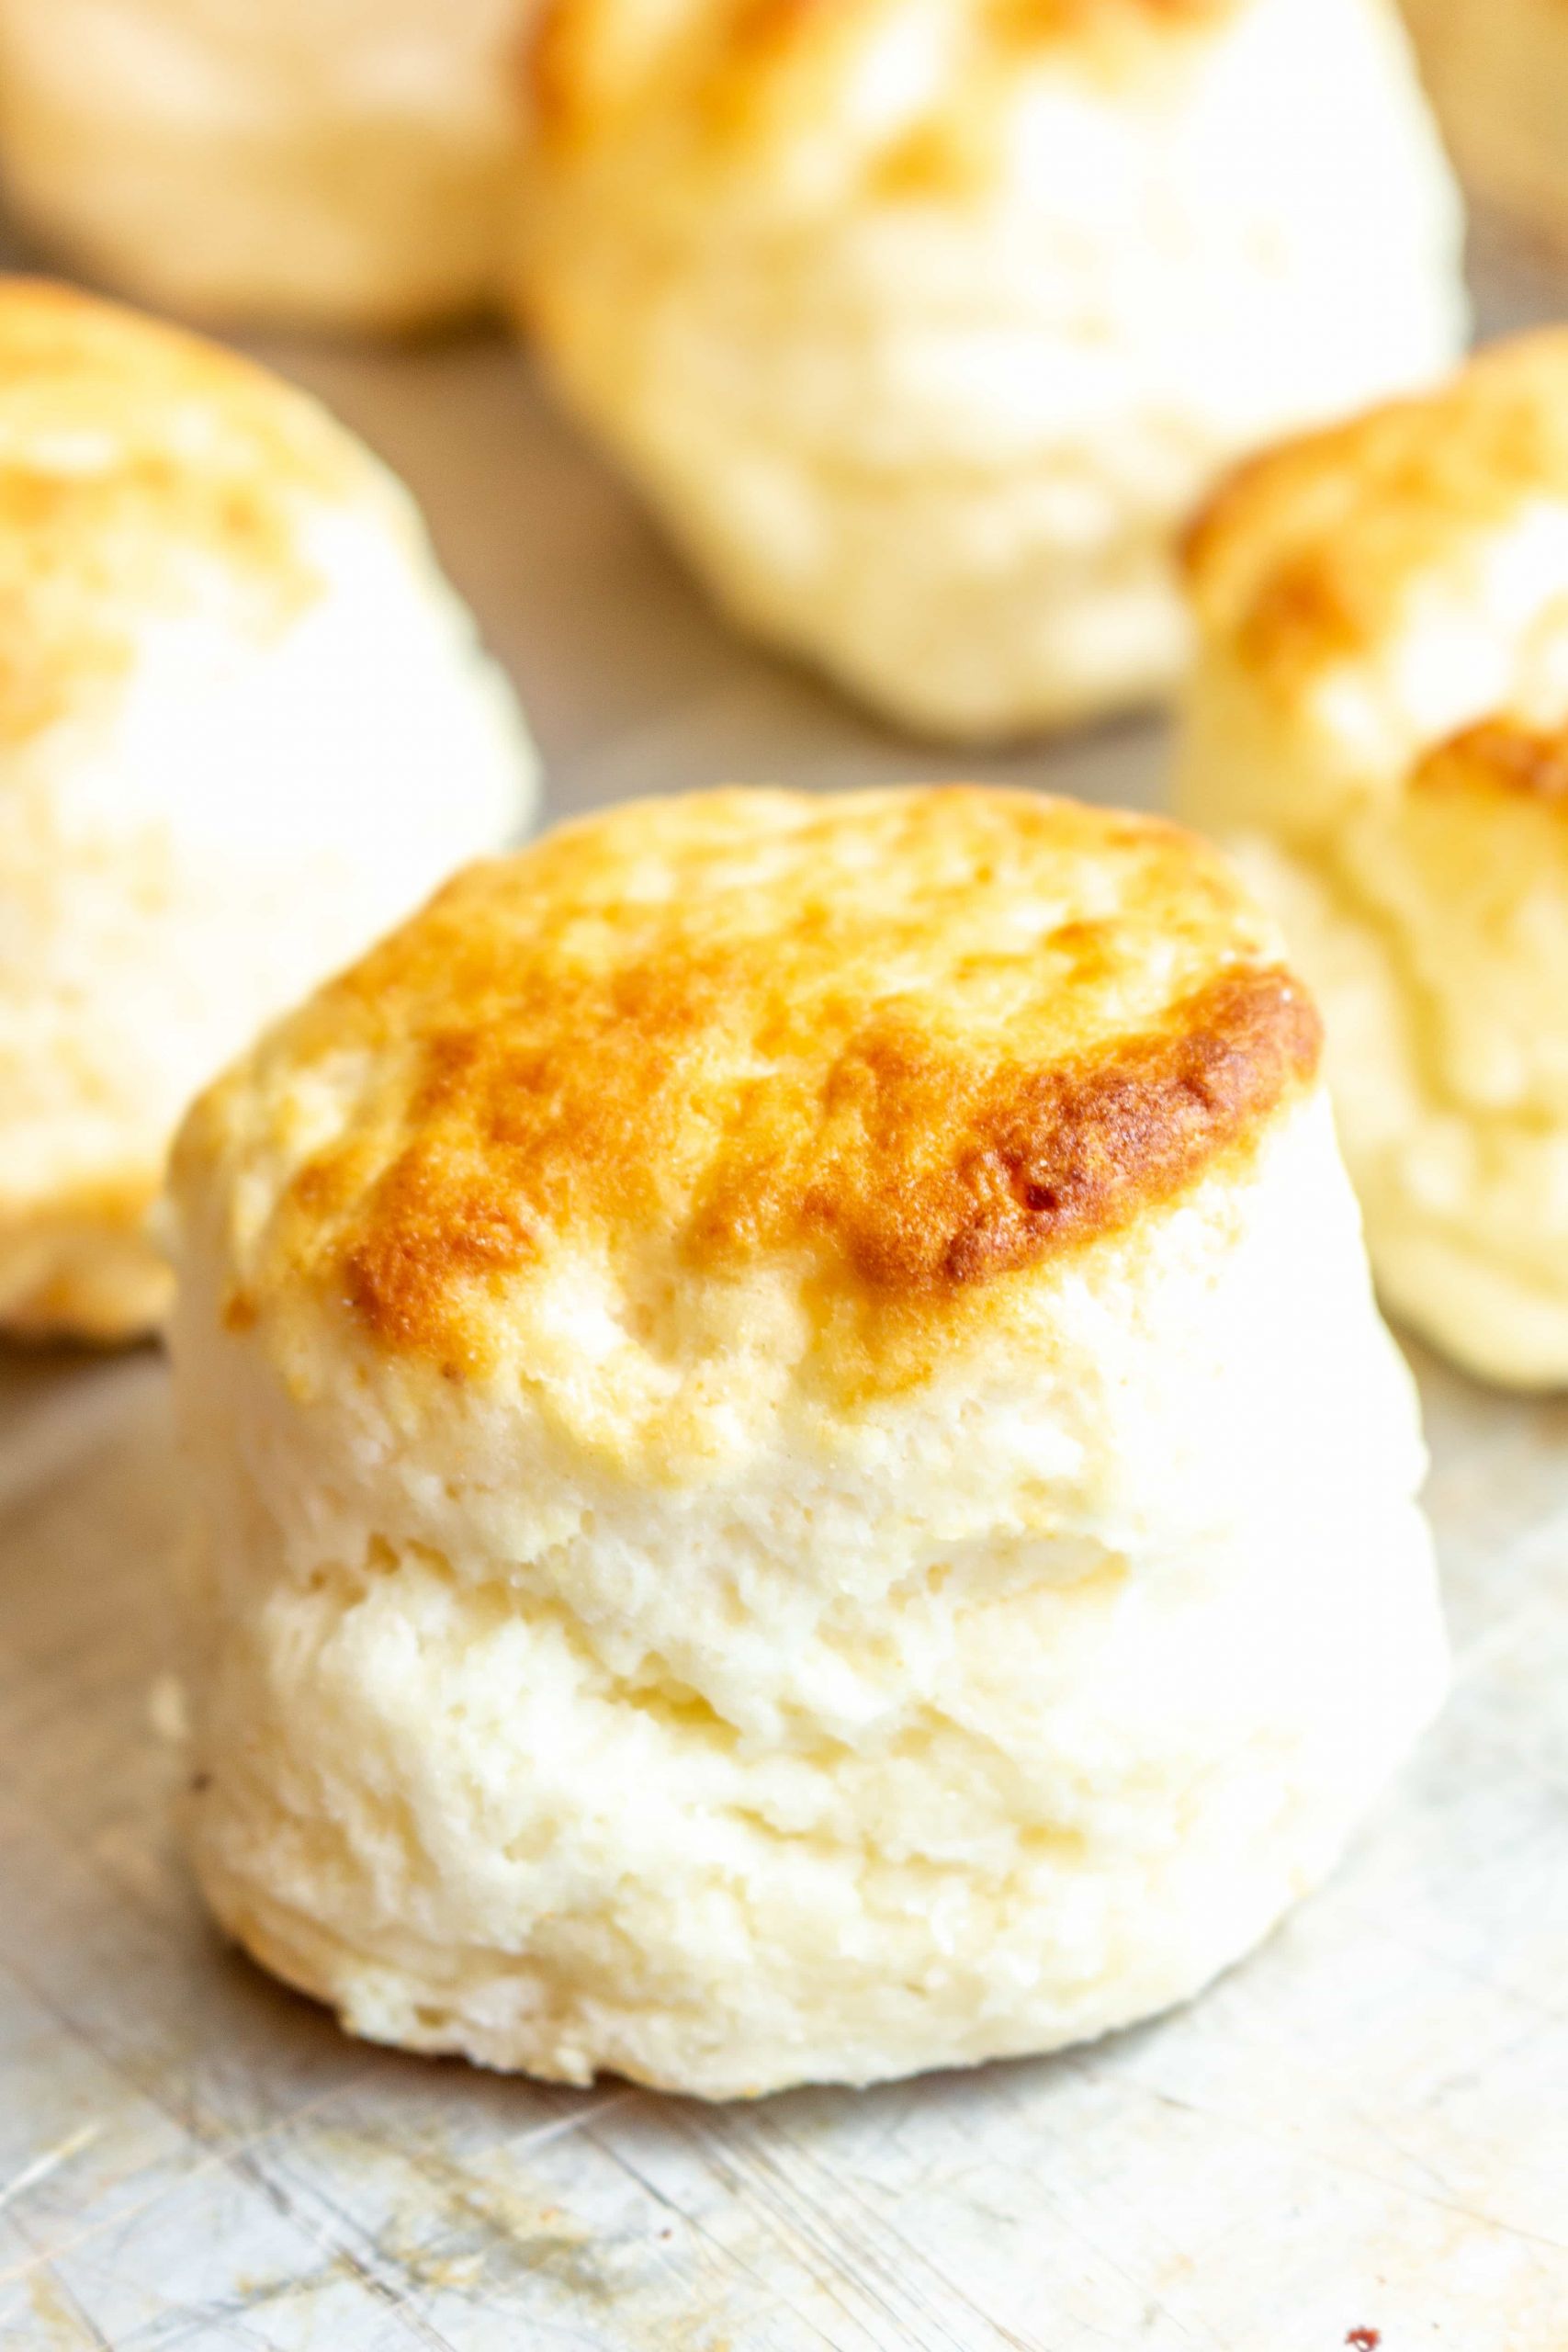 Dairy Free Biscuit Recipe Awesome Easy Gluten Free Biscuits Dairy Free Option Life after